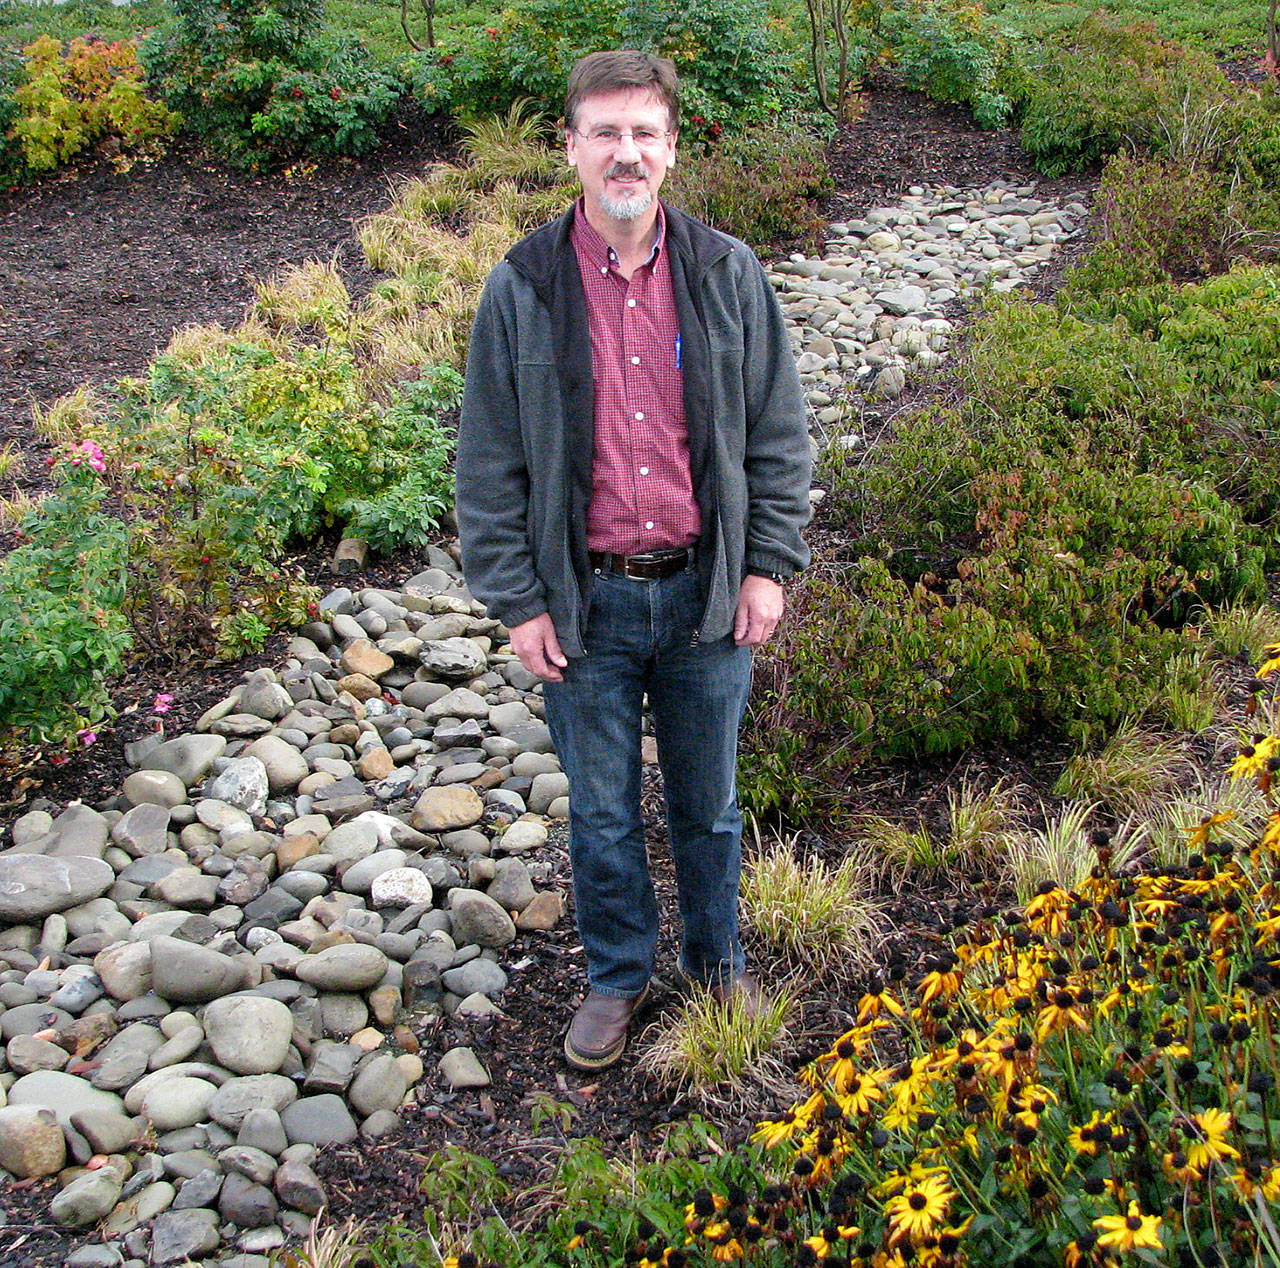 Joe Holtrop, Clallam Conservation District executive director — pictured here in the rain garden at the Clallam County Courthouse — presents “Rain Gardens and Runoff” on May 9 in Port Angeles, part of the Green Thumb Garden Tips education series sponsored by the WSU Clallam County Master Gardeners. Photo by Amanda Rosenberg